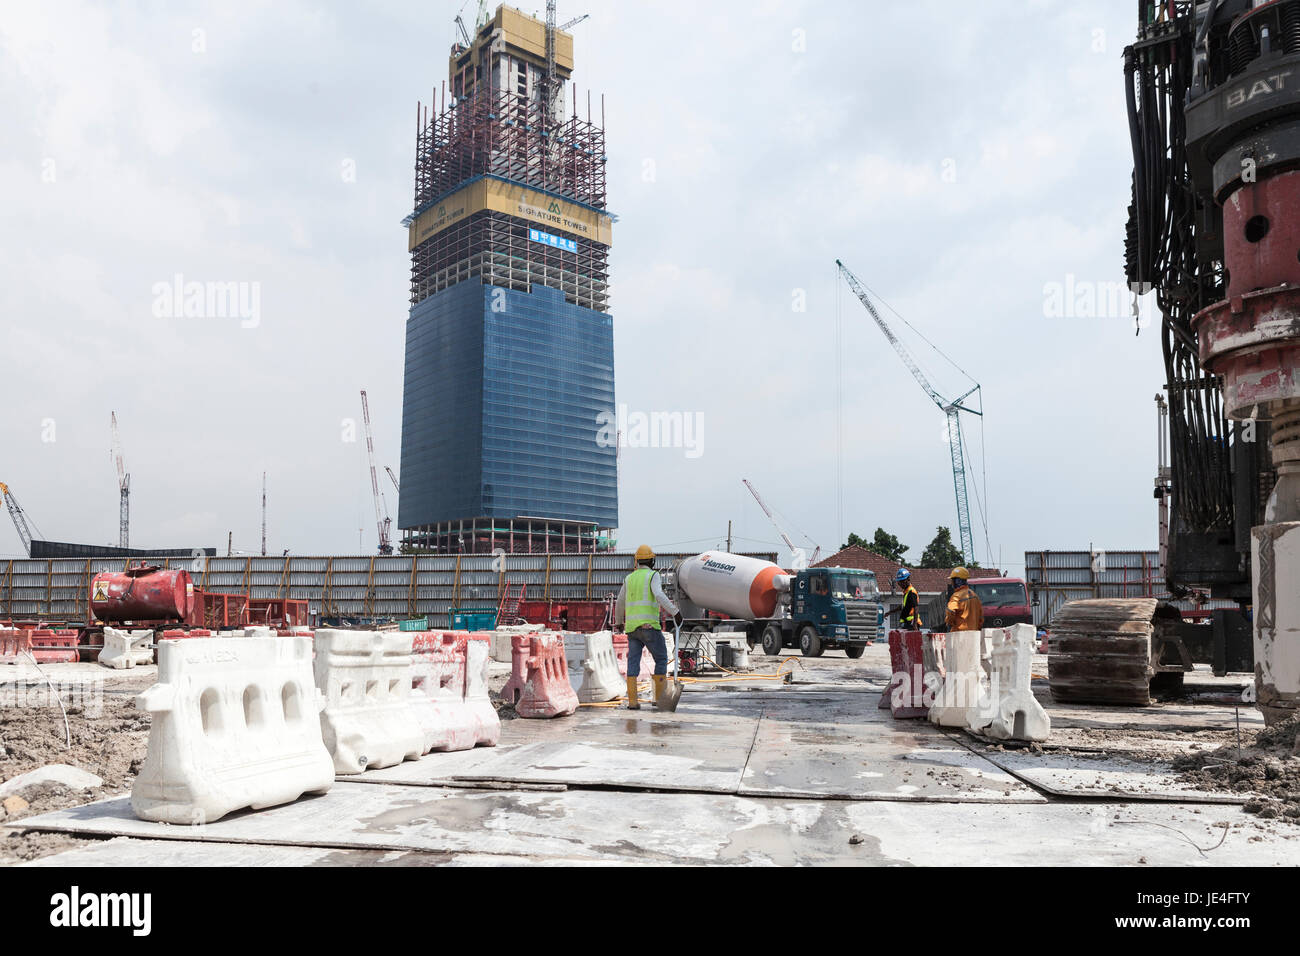 Workers labor near the under construction Signature Tower in the Tun Razak Exchange financial district, developed by TRX City Sdn., in Kuala Lumpur, Malaysia Stock Photo